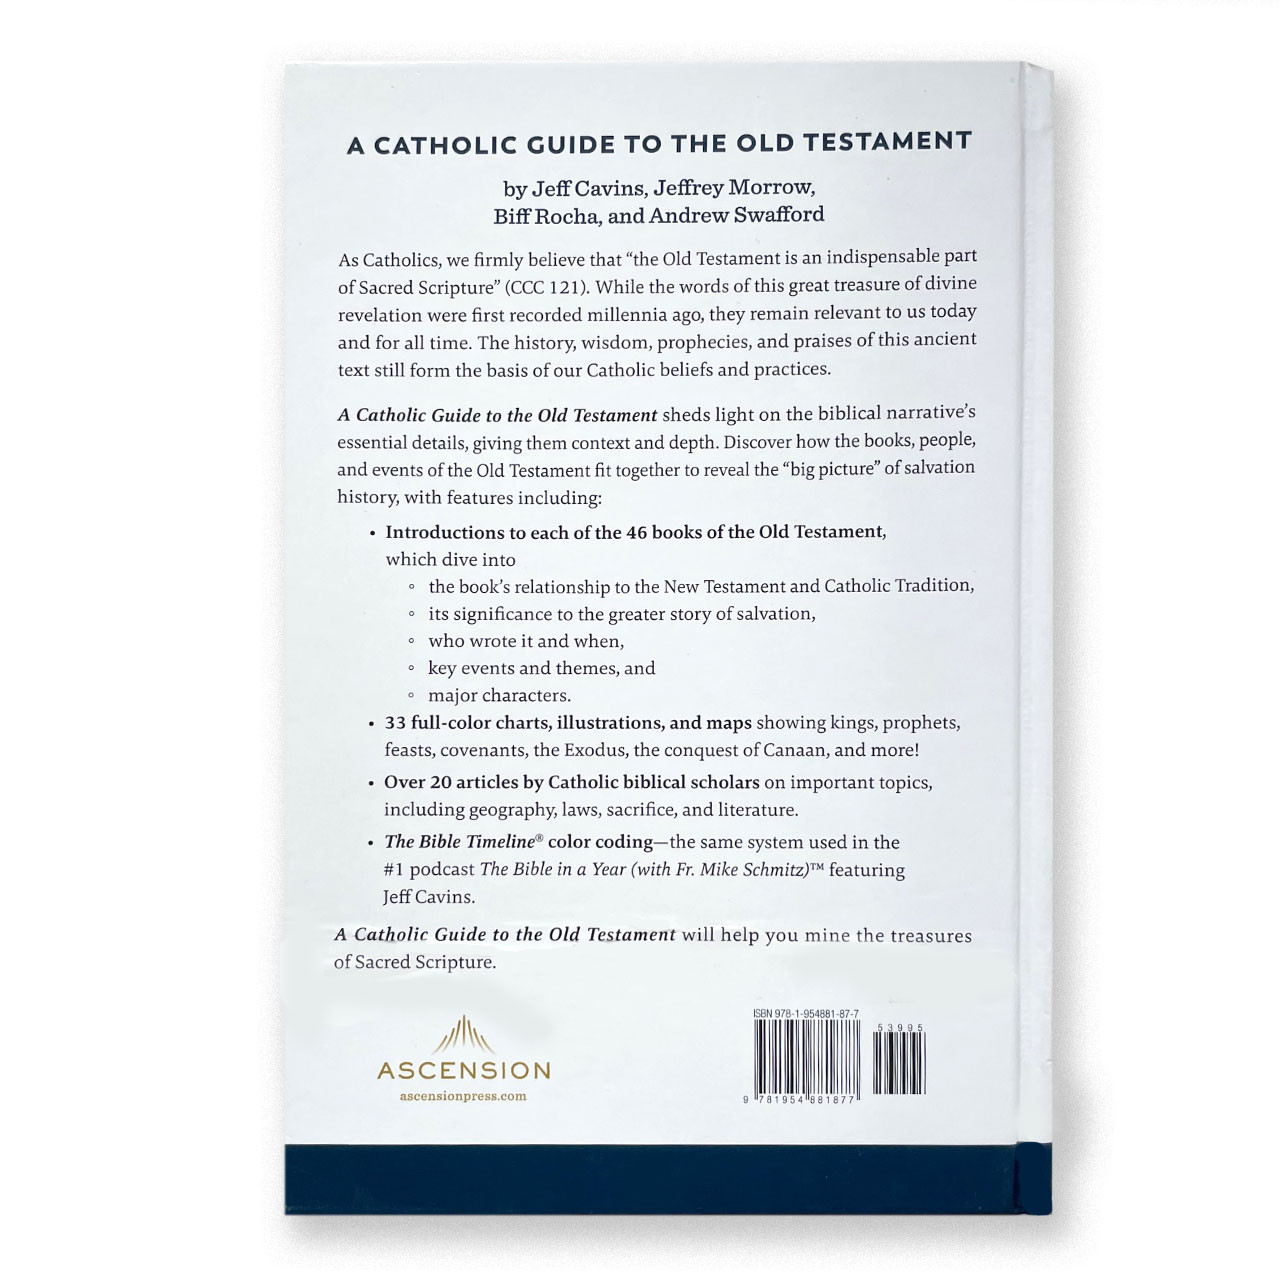 Back Cover of the Catholic Guide to the Old Testament